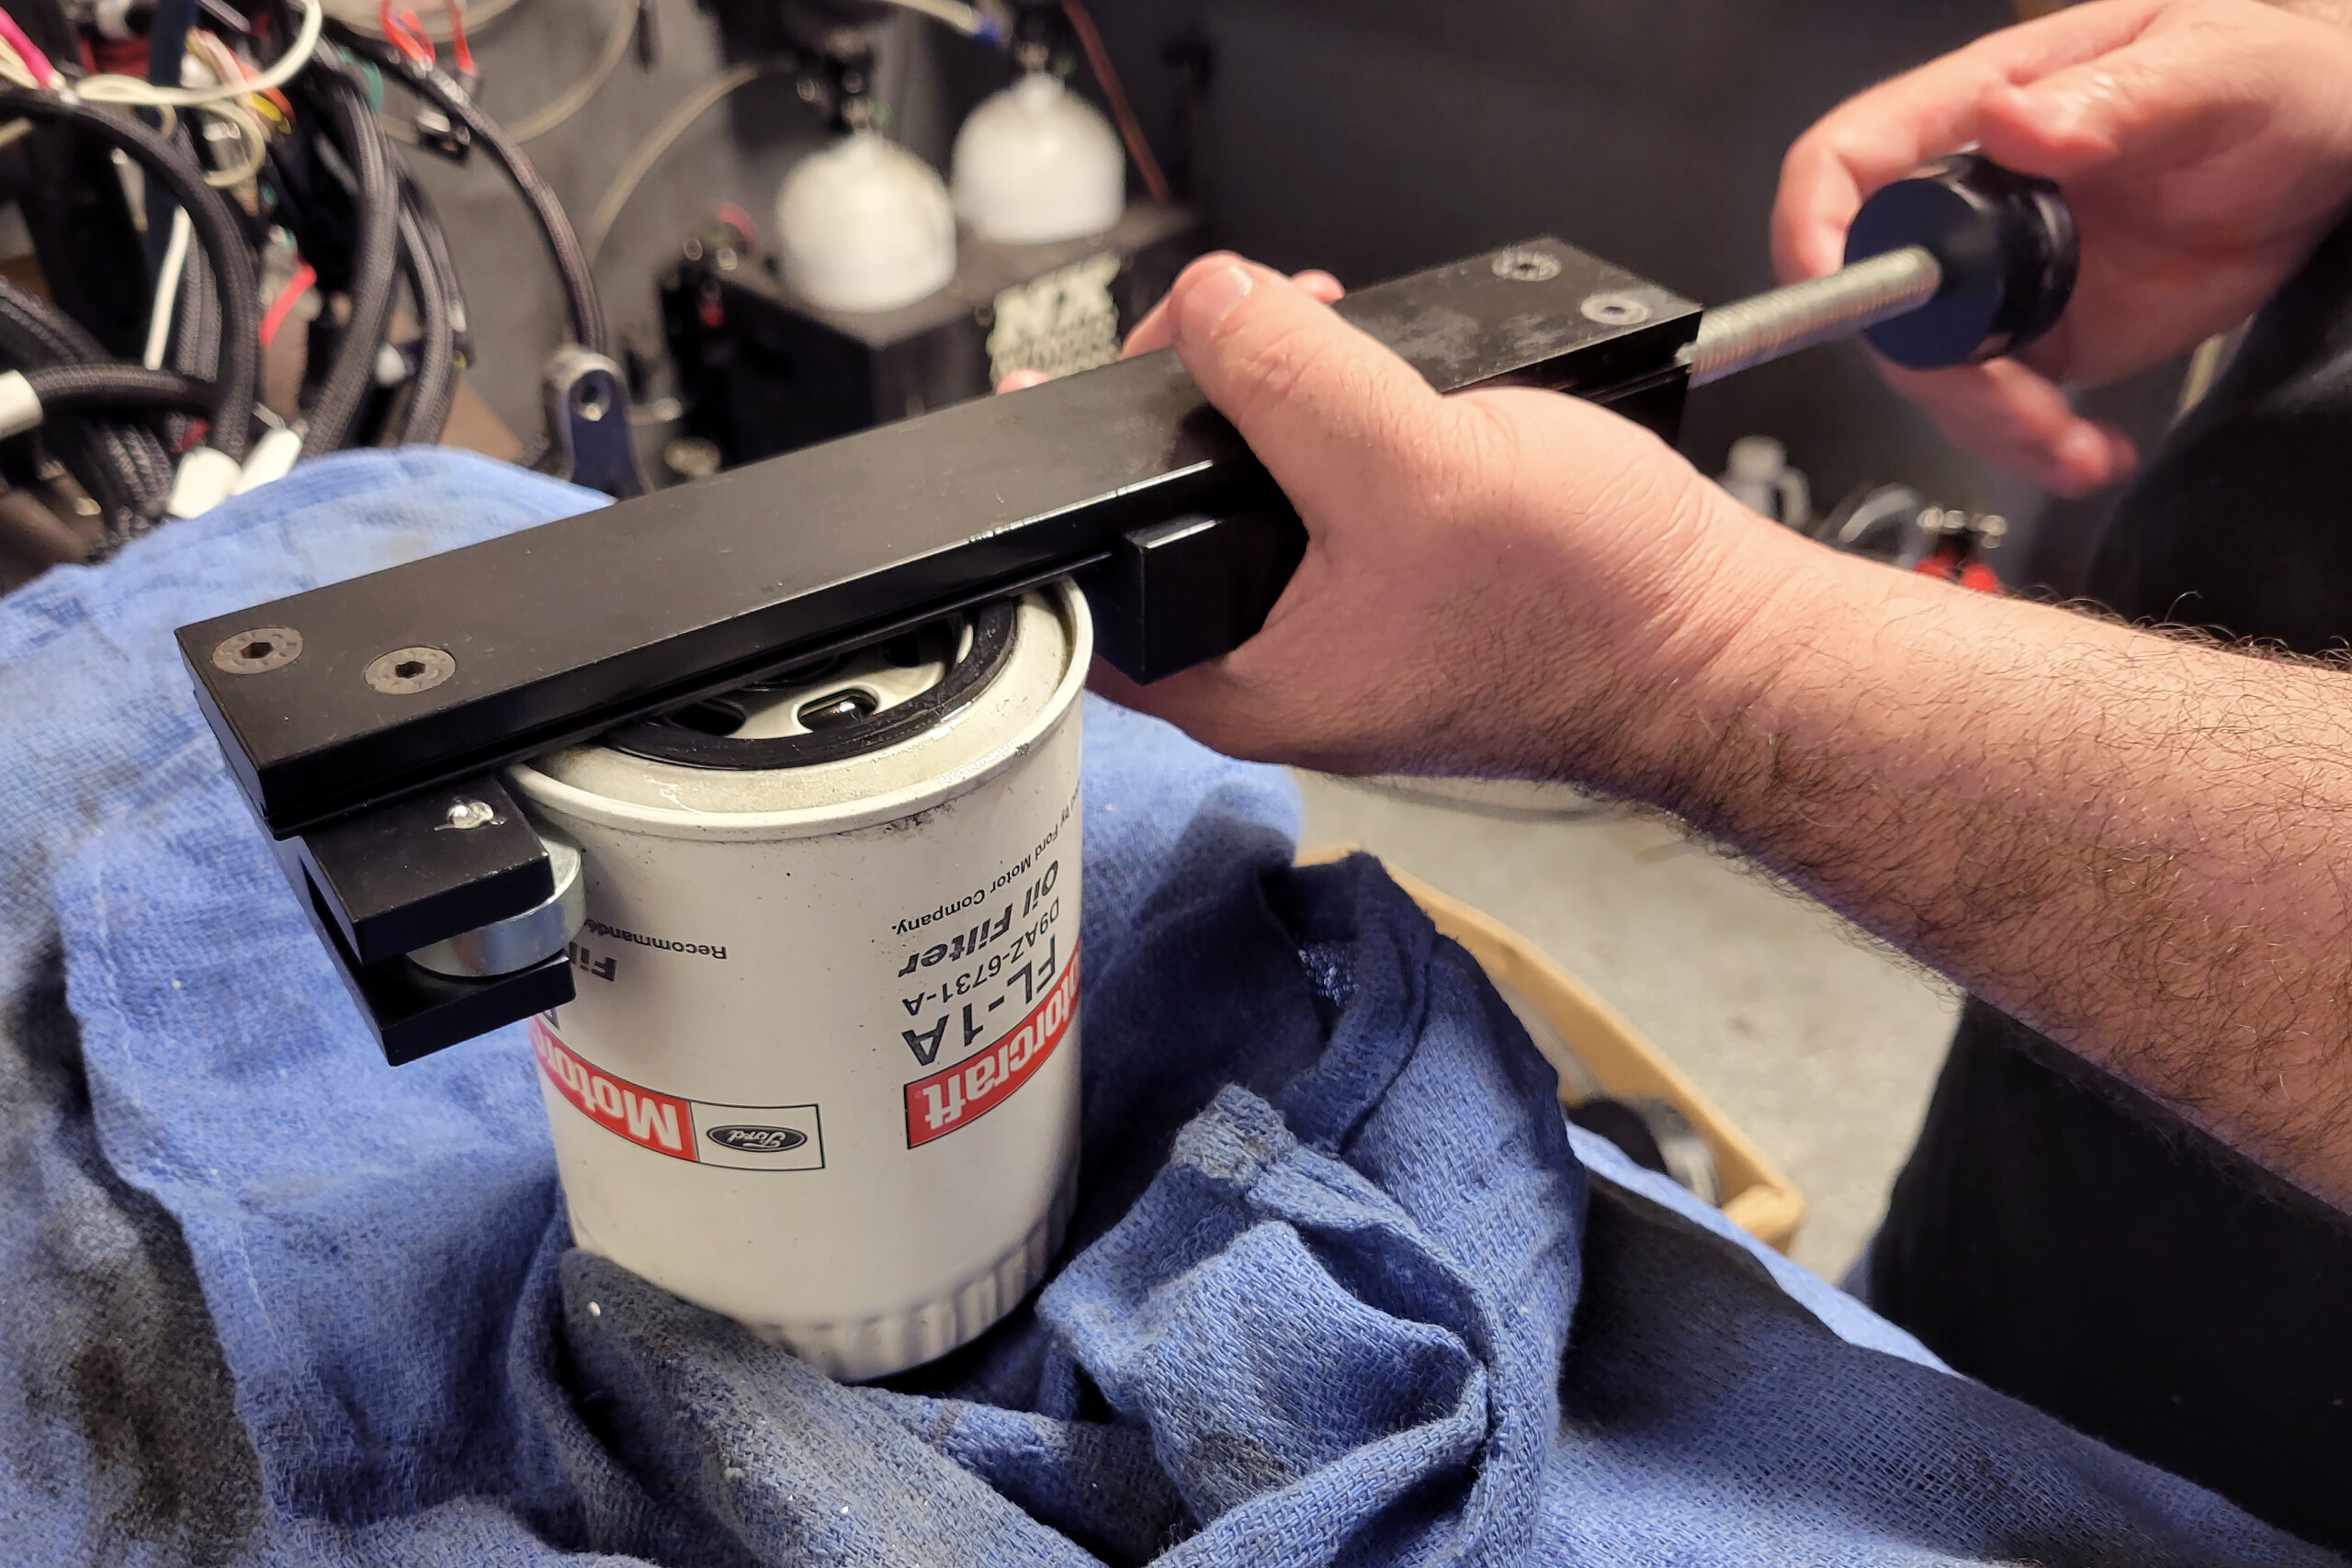 EngineLabs’ Tool Of The Month: Summit Oil Filter Cutter